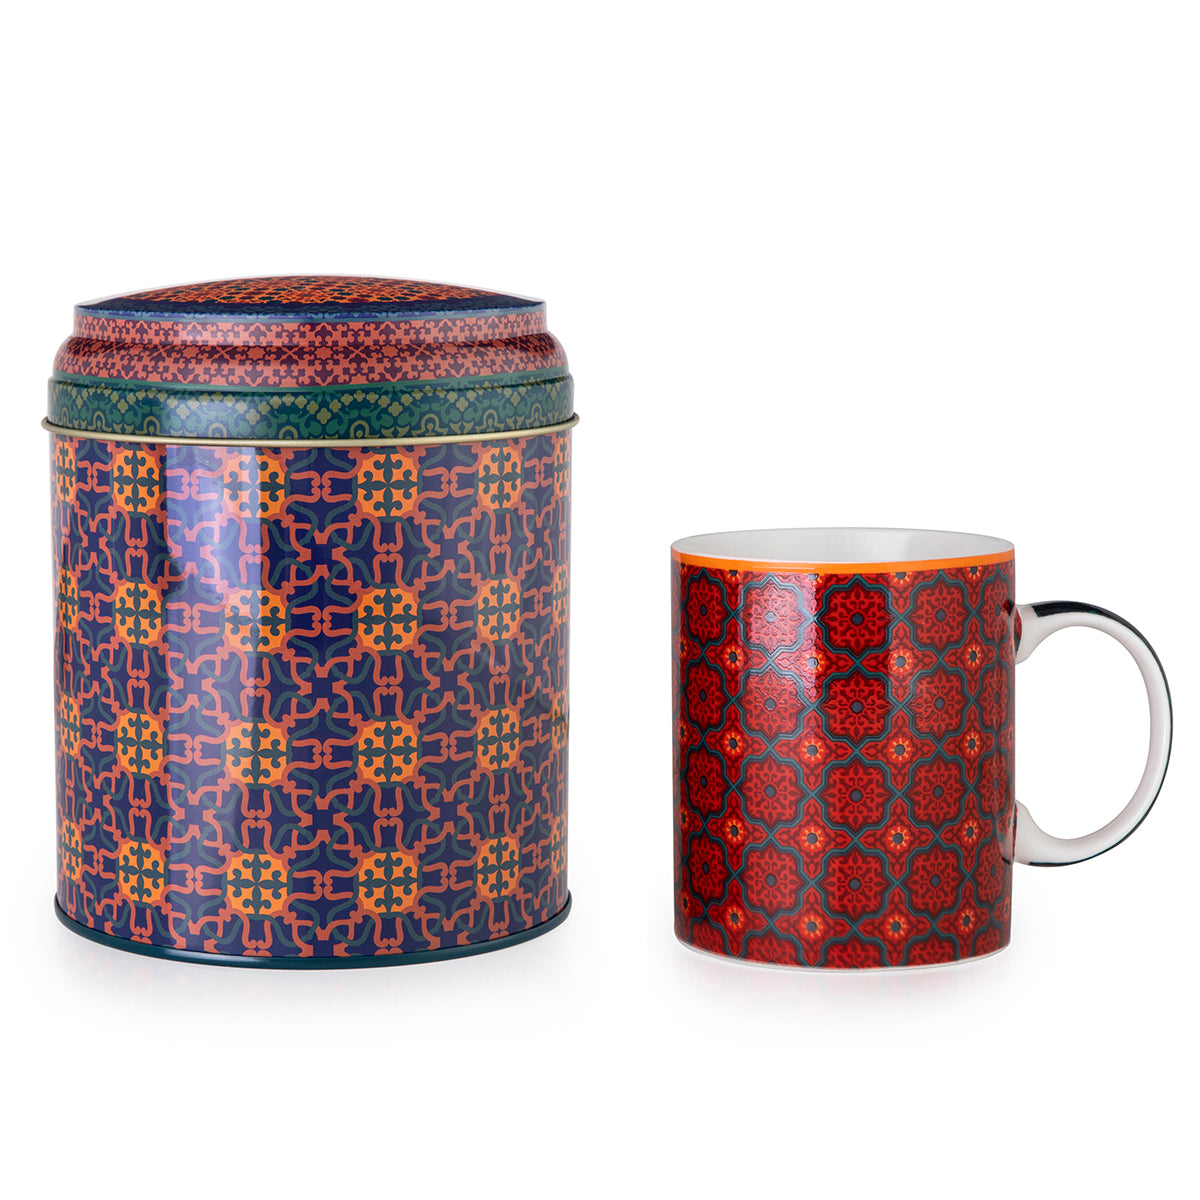 Shop The Latest Collection Of Images D'Orient Tin Box With Mug Vagabonde - Por-232041 In Lebanon